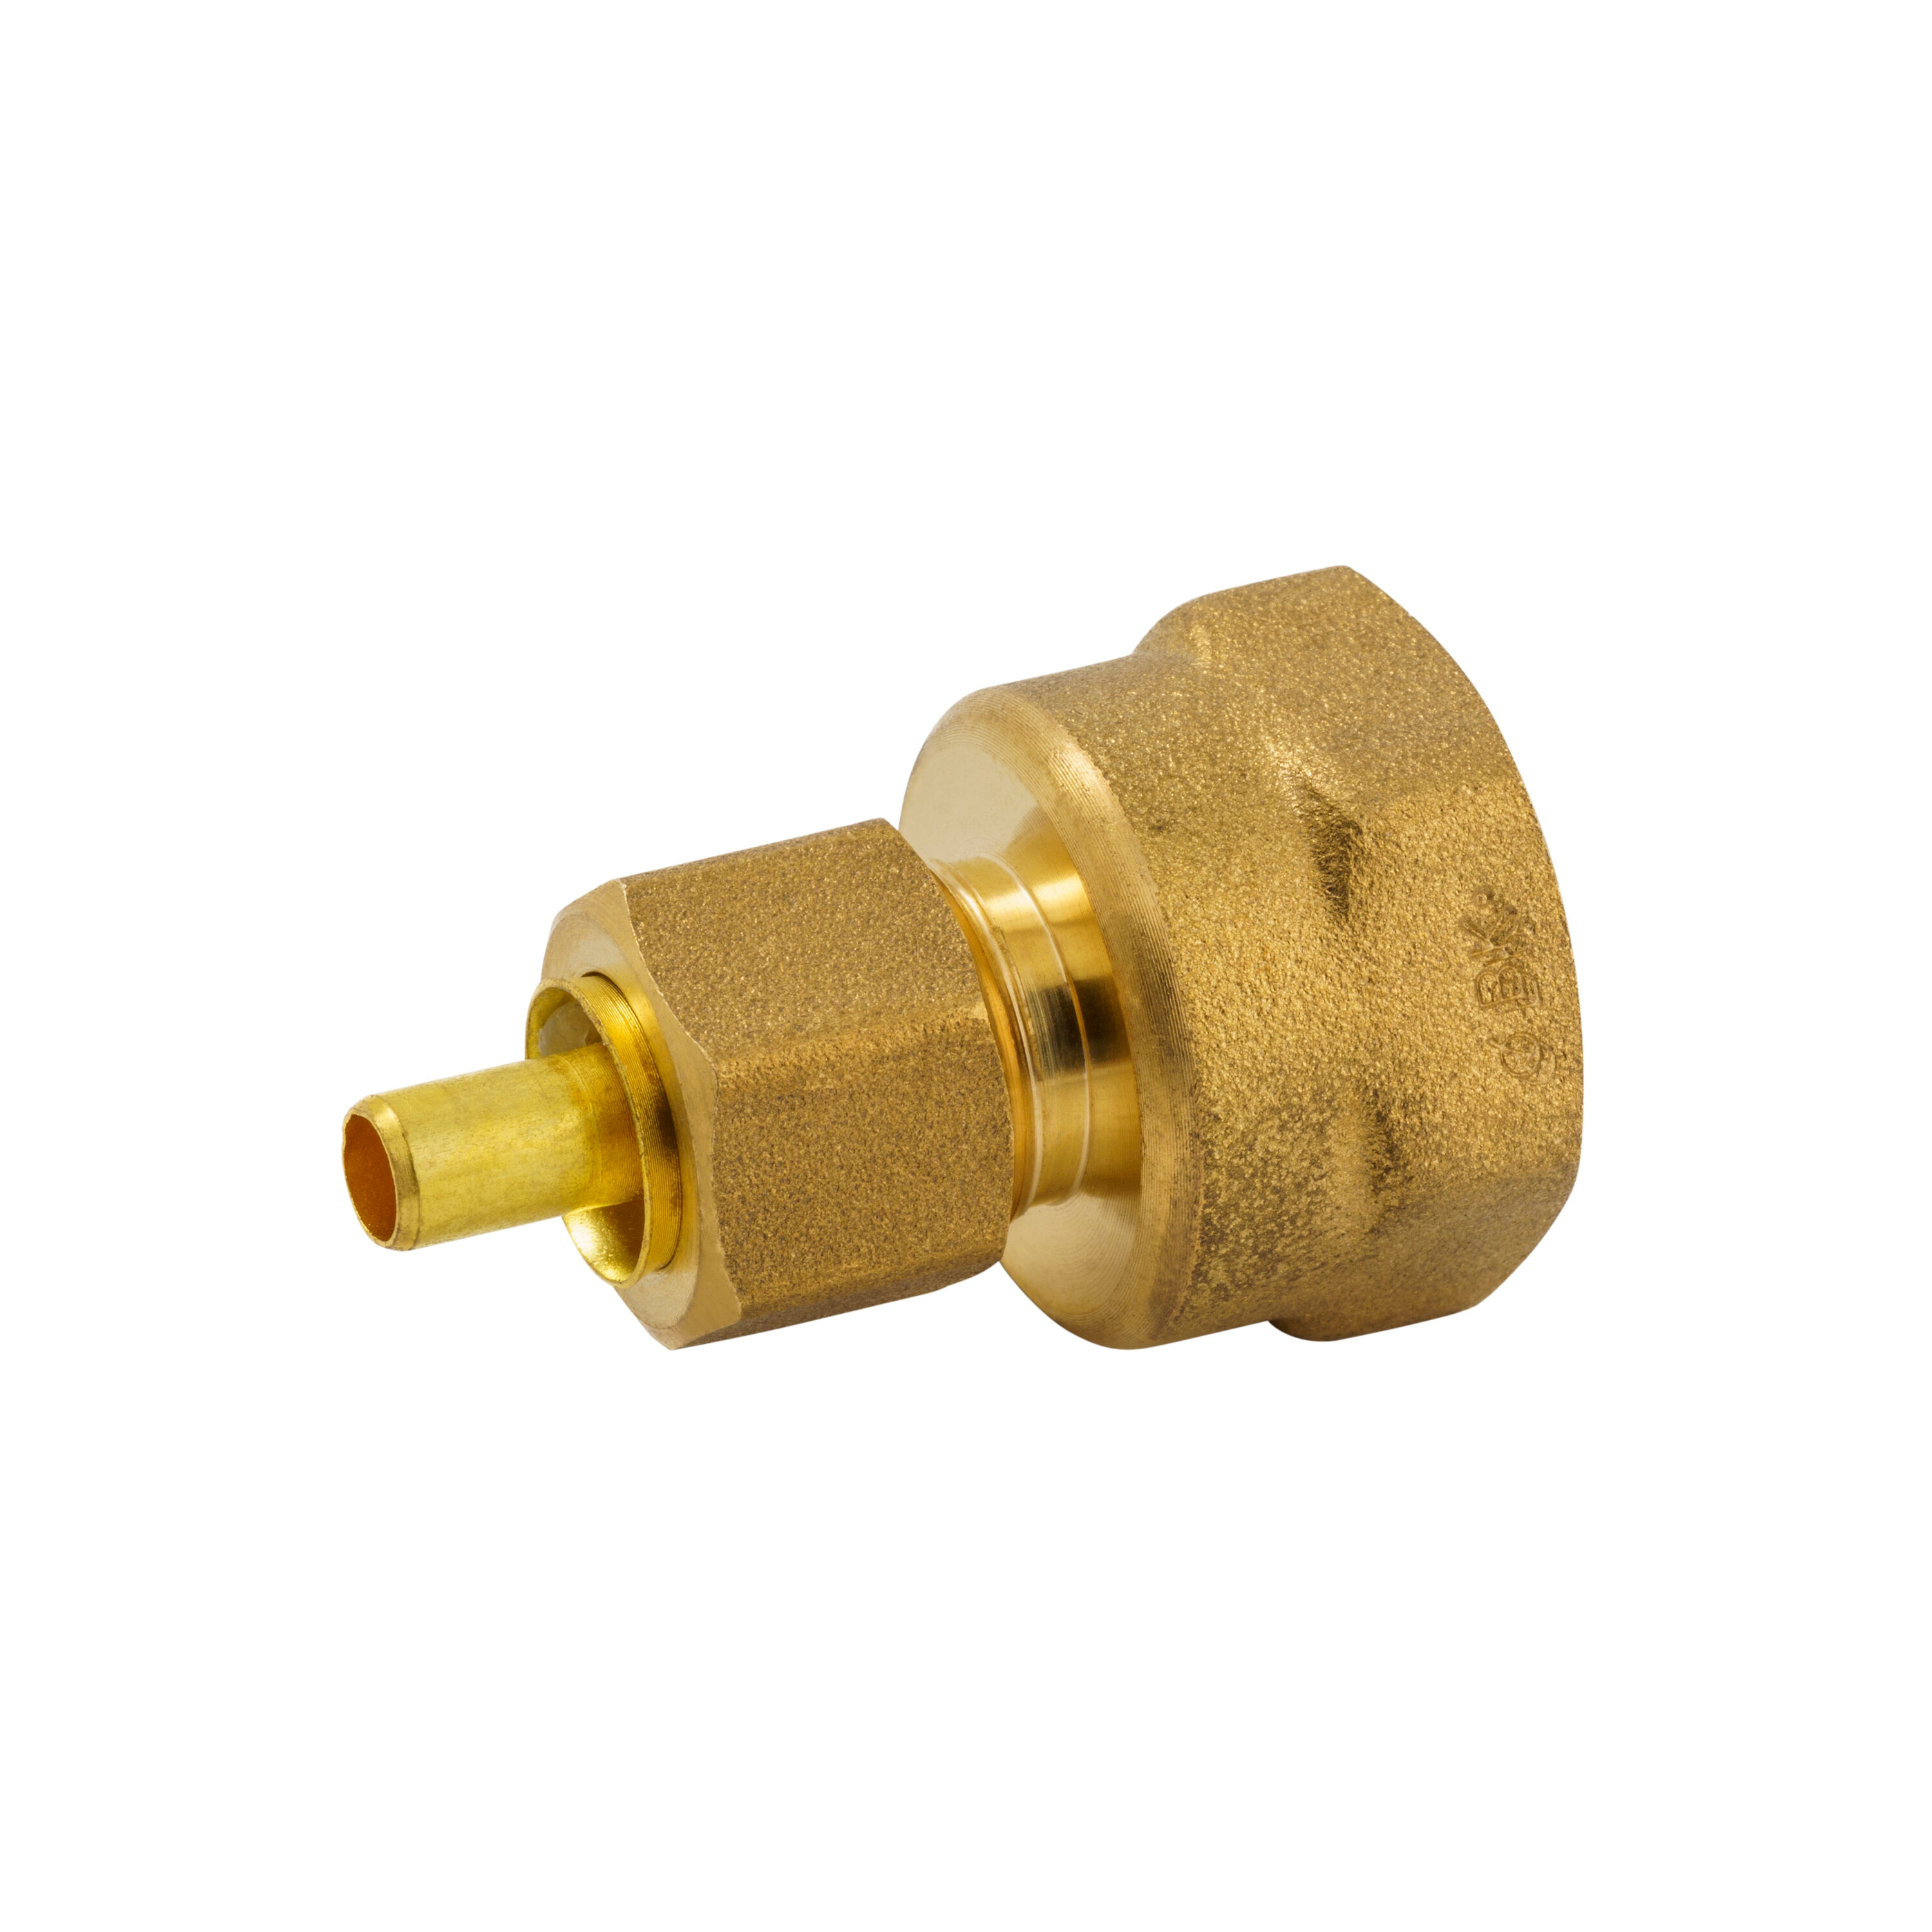 EZ-FLO 1-1/4-in x 1/2-in Compression Coupling Fitting in the Brass